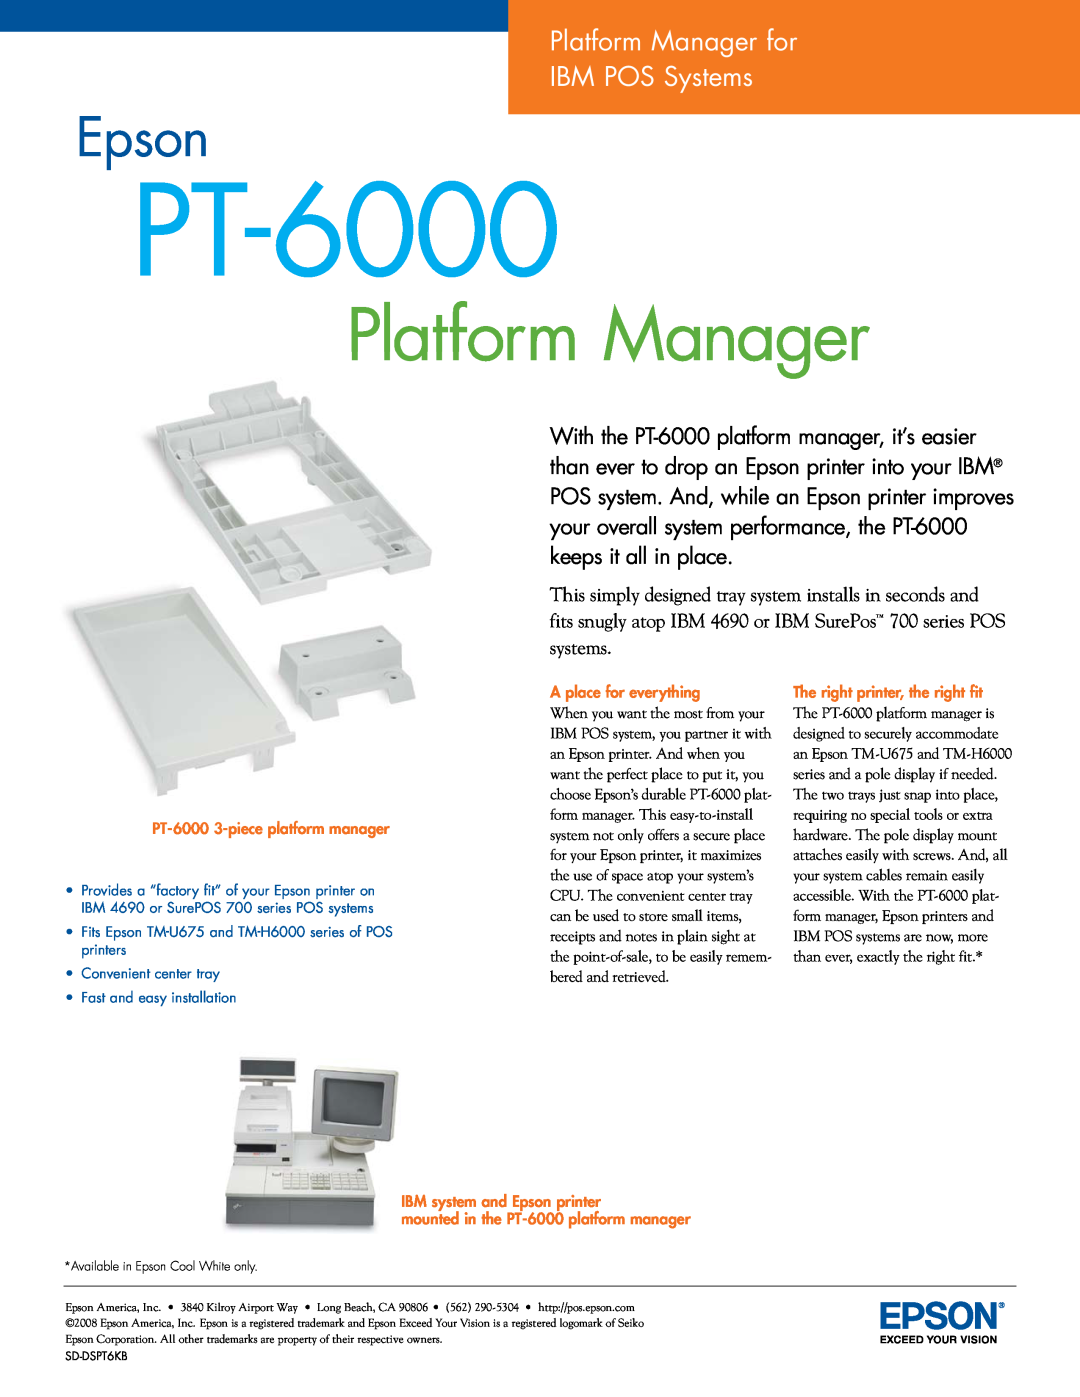 Epson manual Epson, Platform Manager for IBM POS Systems, PT-6000 3-pieceplatform manager, A place for everything 